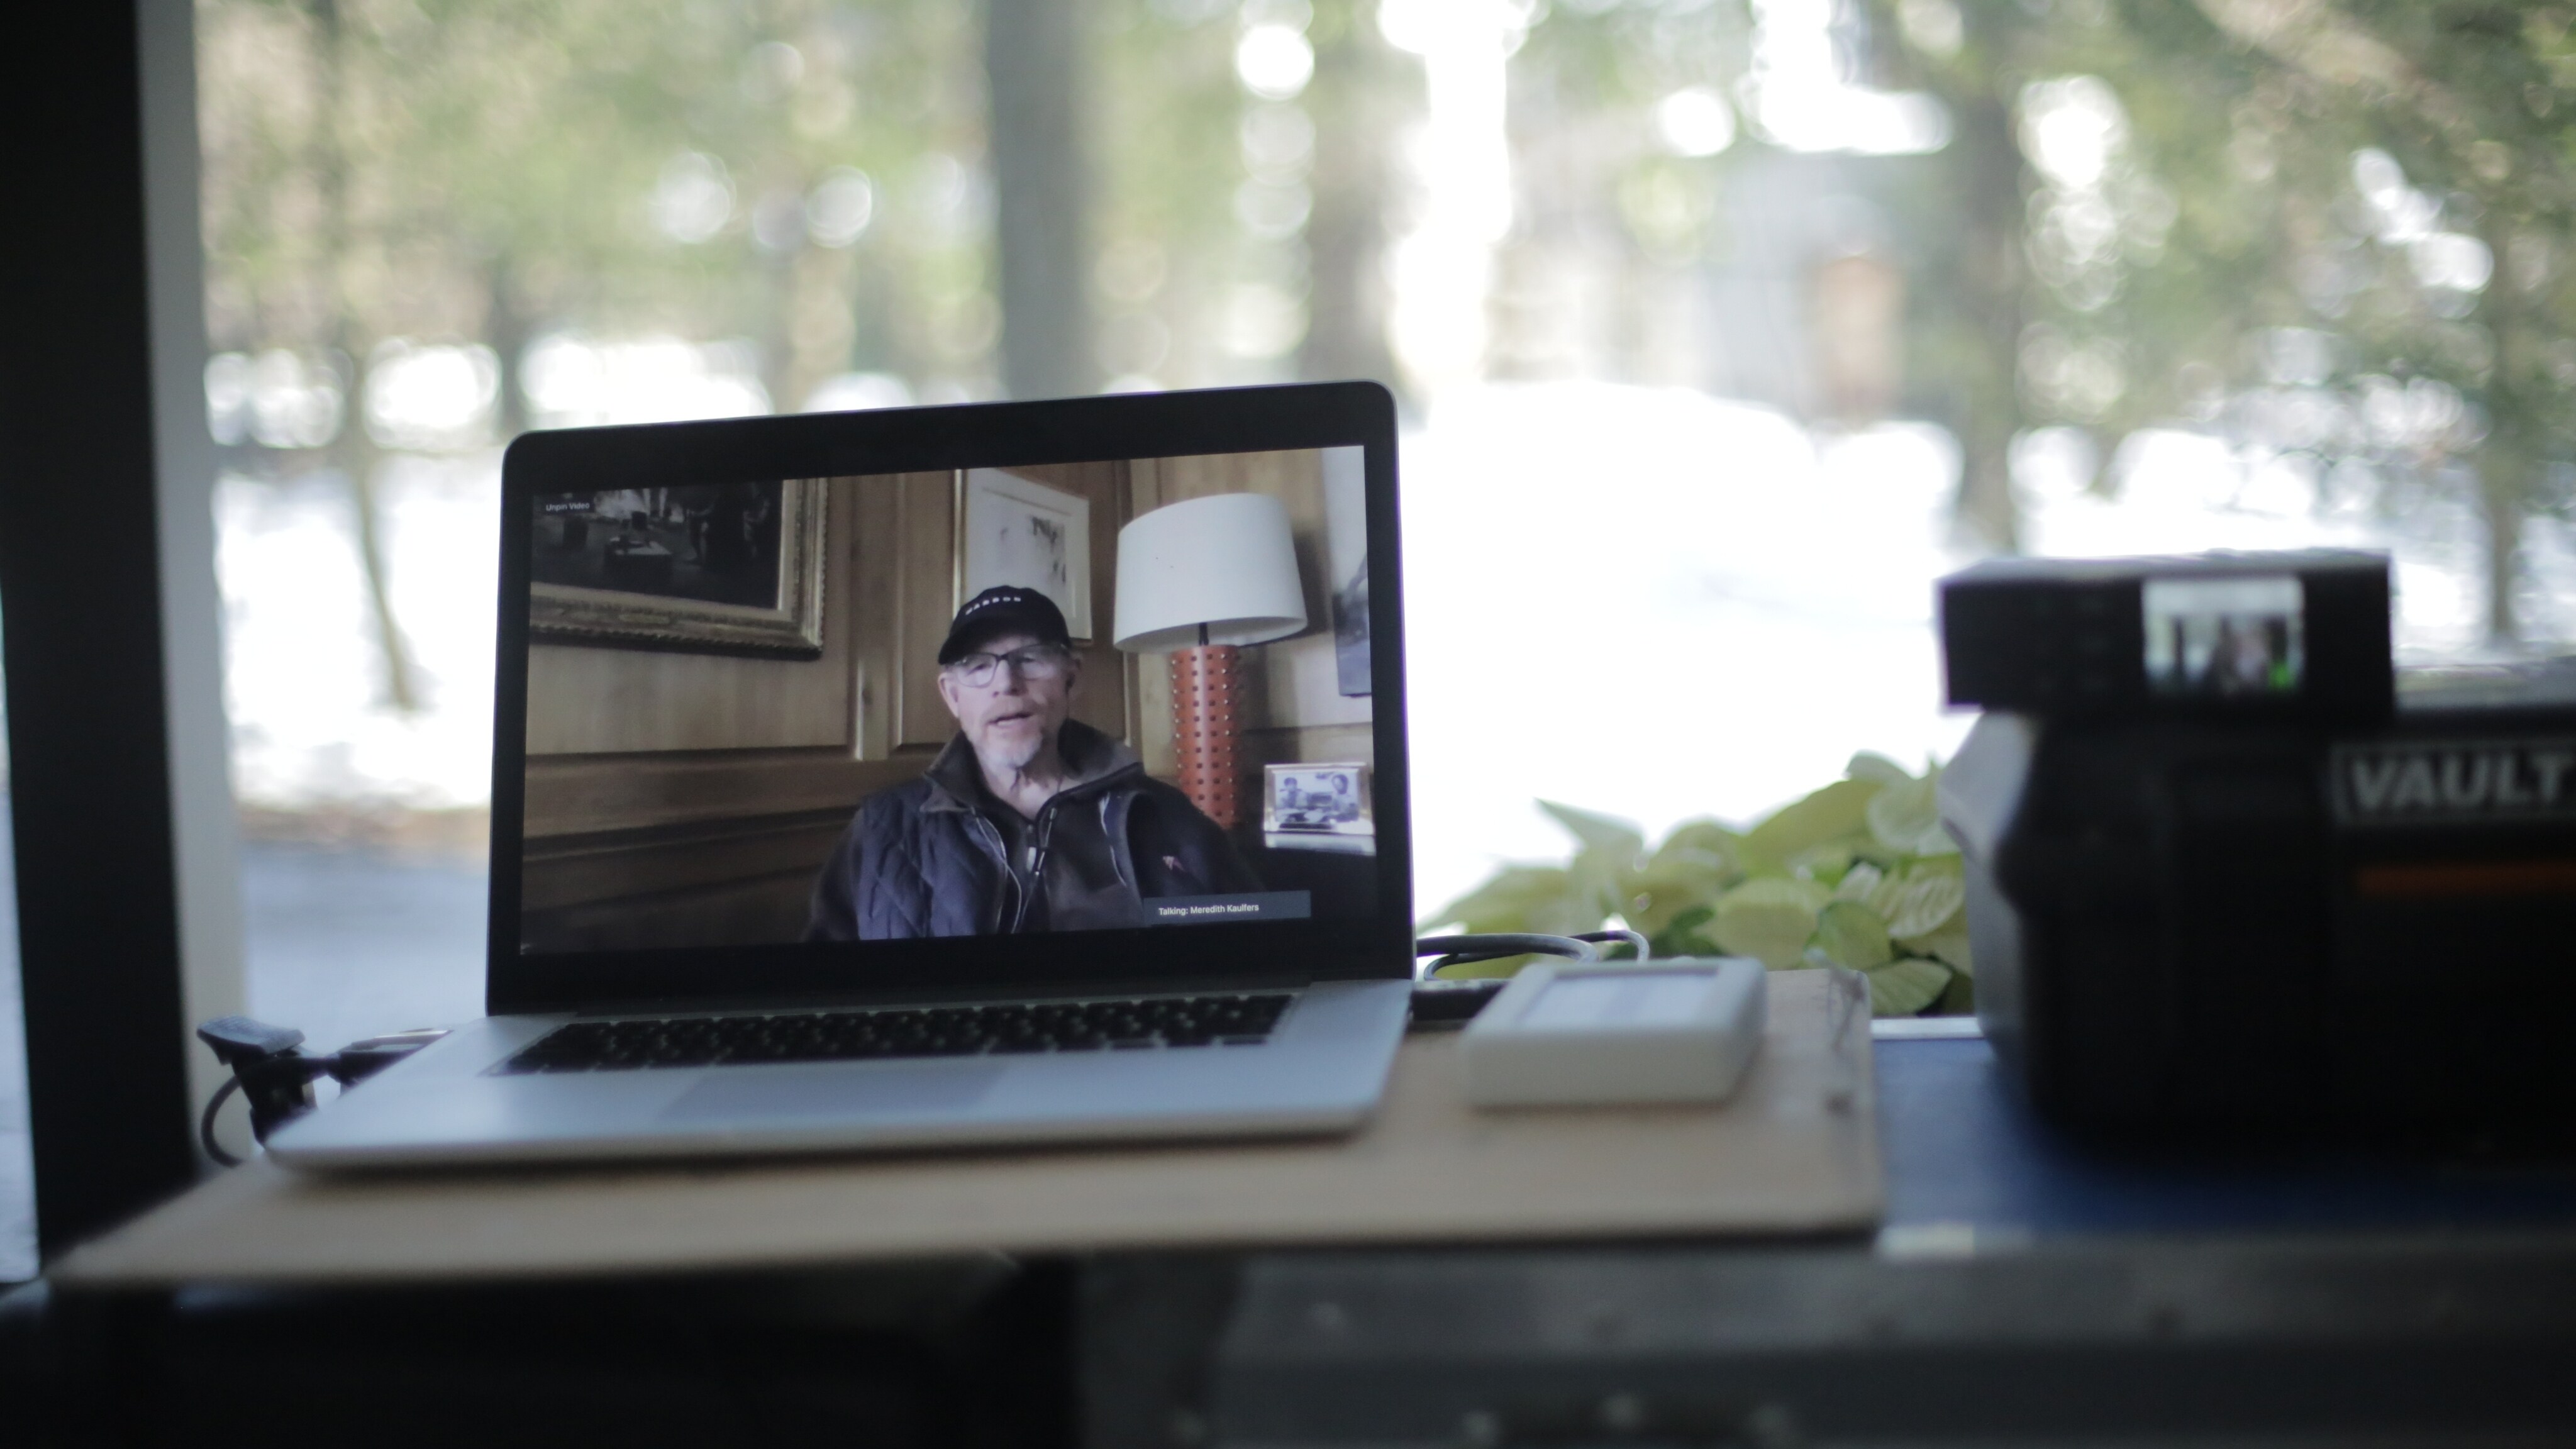 Director, Ron Howard, on a laptop screen, preparing for interview with José Andrés. (Credit: National Geographic/Adnelly Marichal)